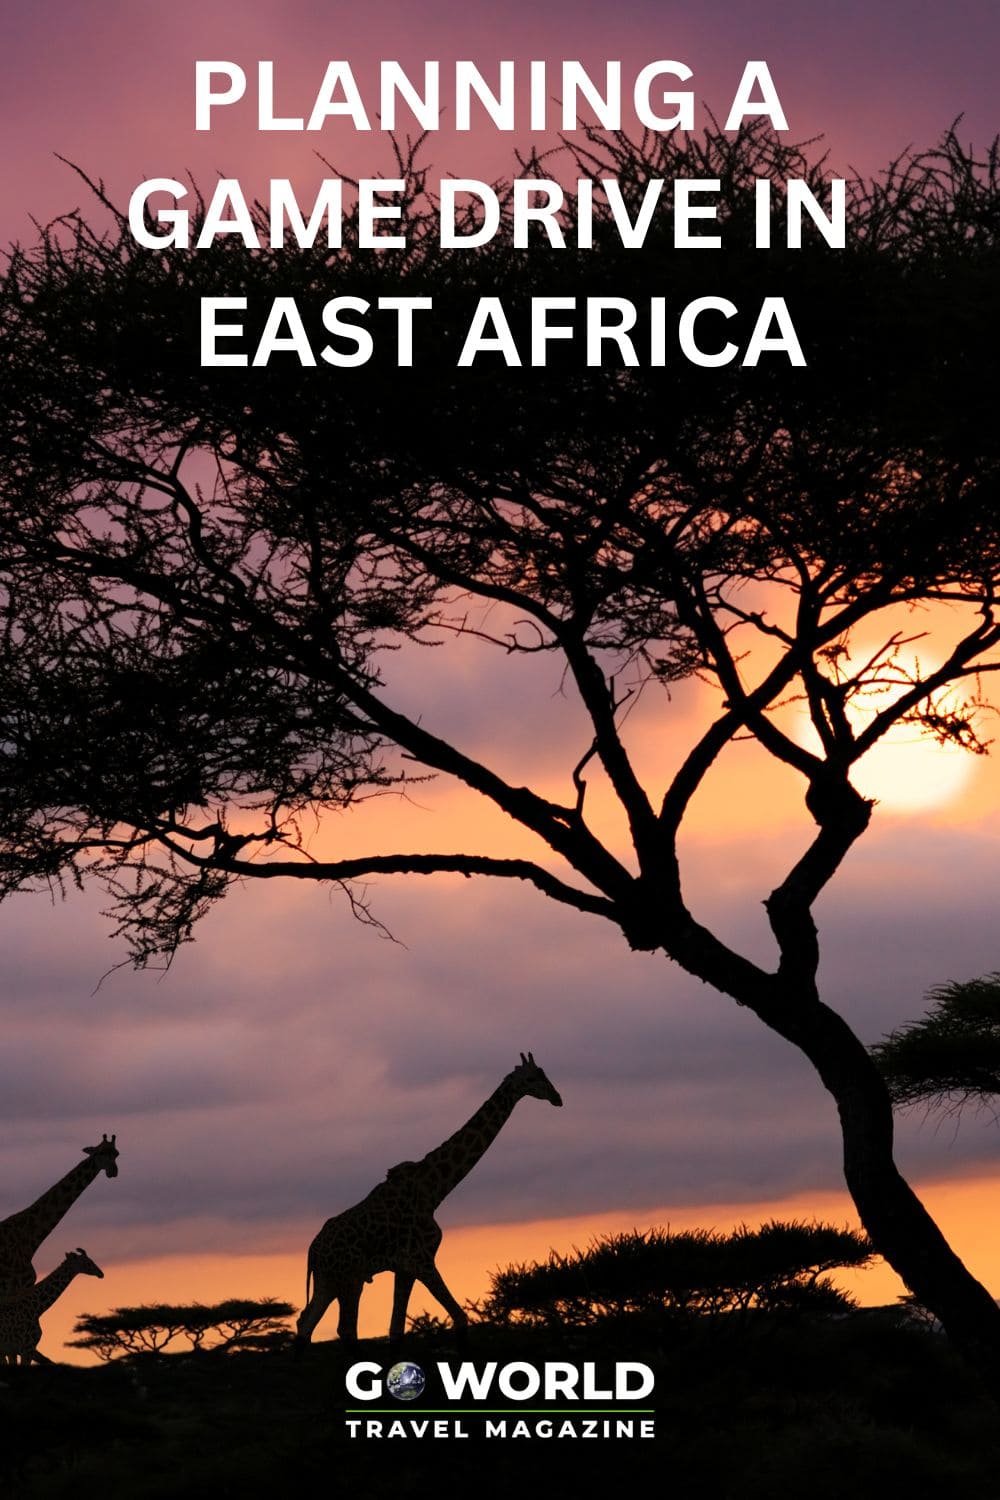 If a wildlife safari is a bucket list item for you, this ultimate guide full of tips for planning game drives in East Africa is a must read. #gamedrivesinafrica #africansafari